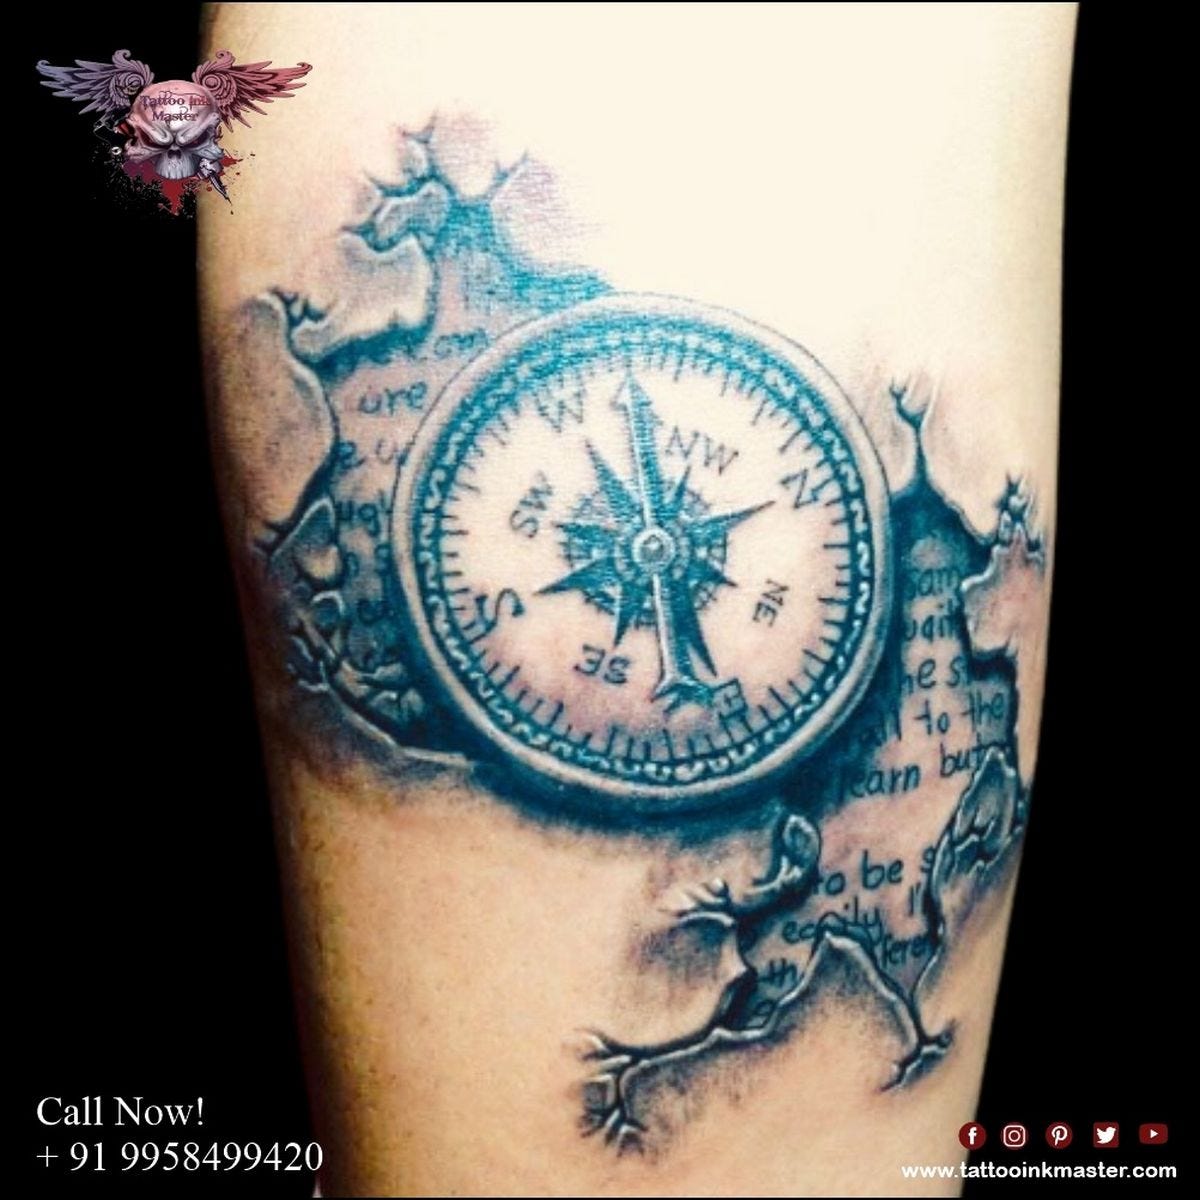 A personalised compass from a - Odditorium Tattoo Studio